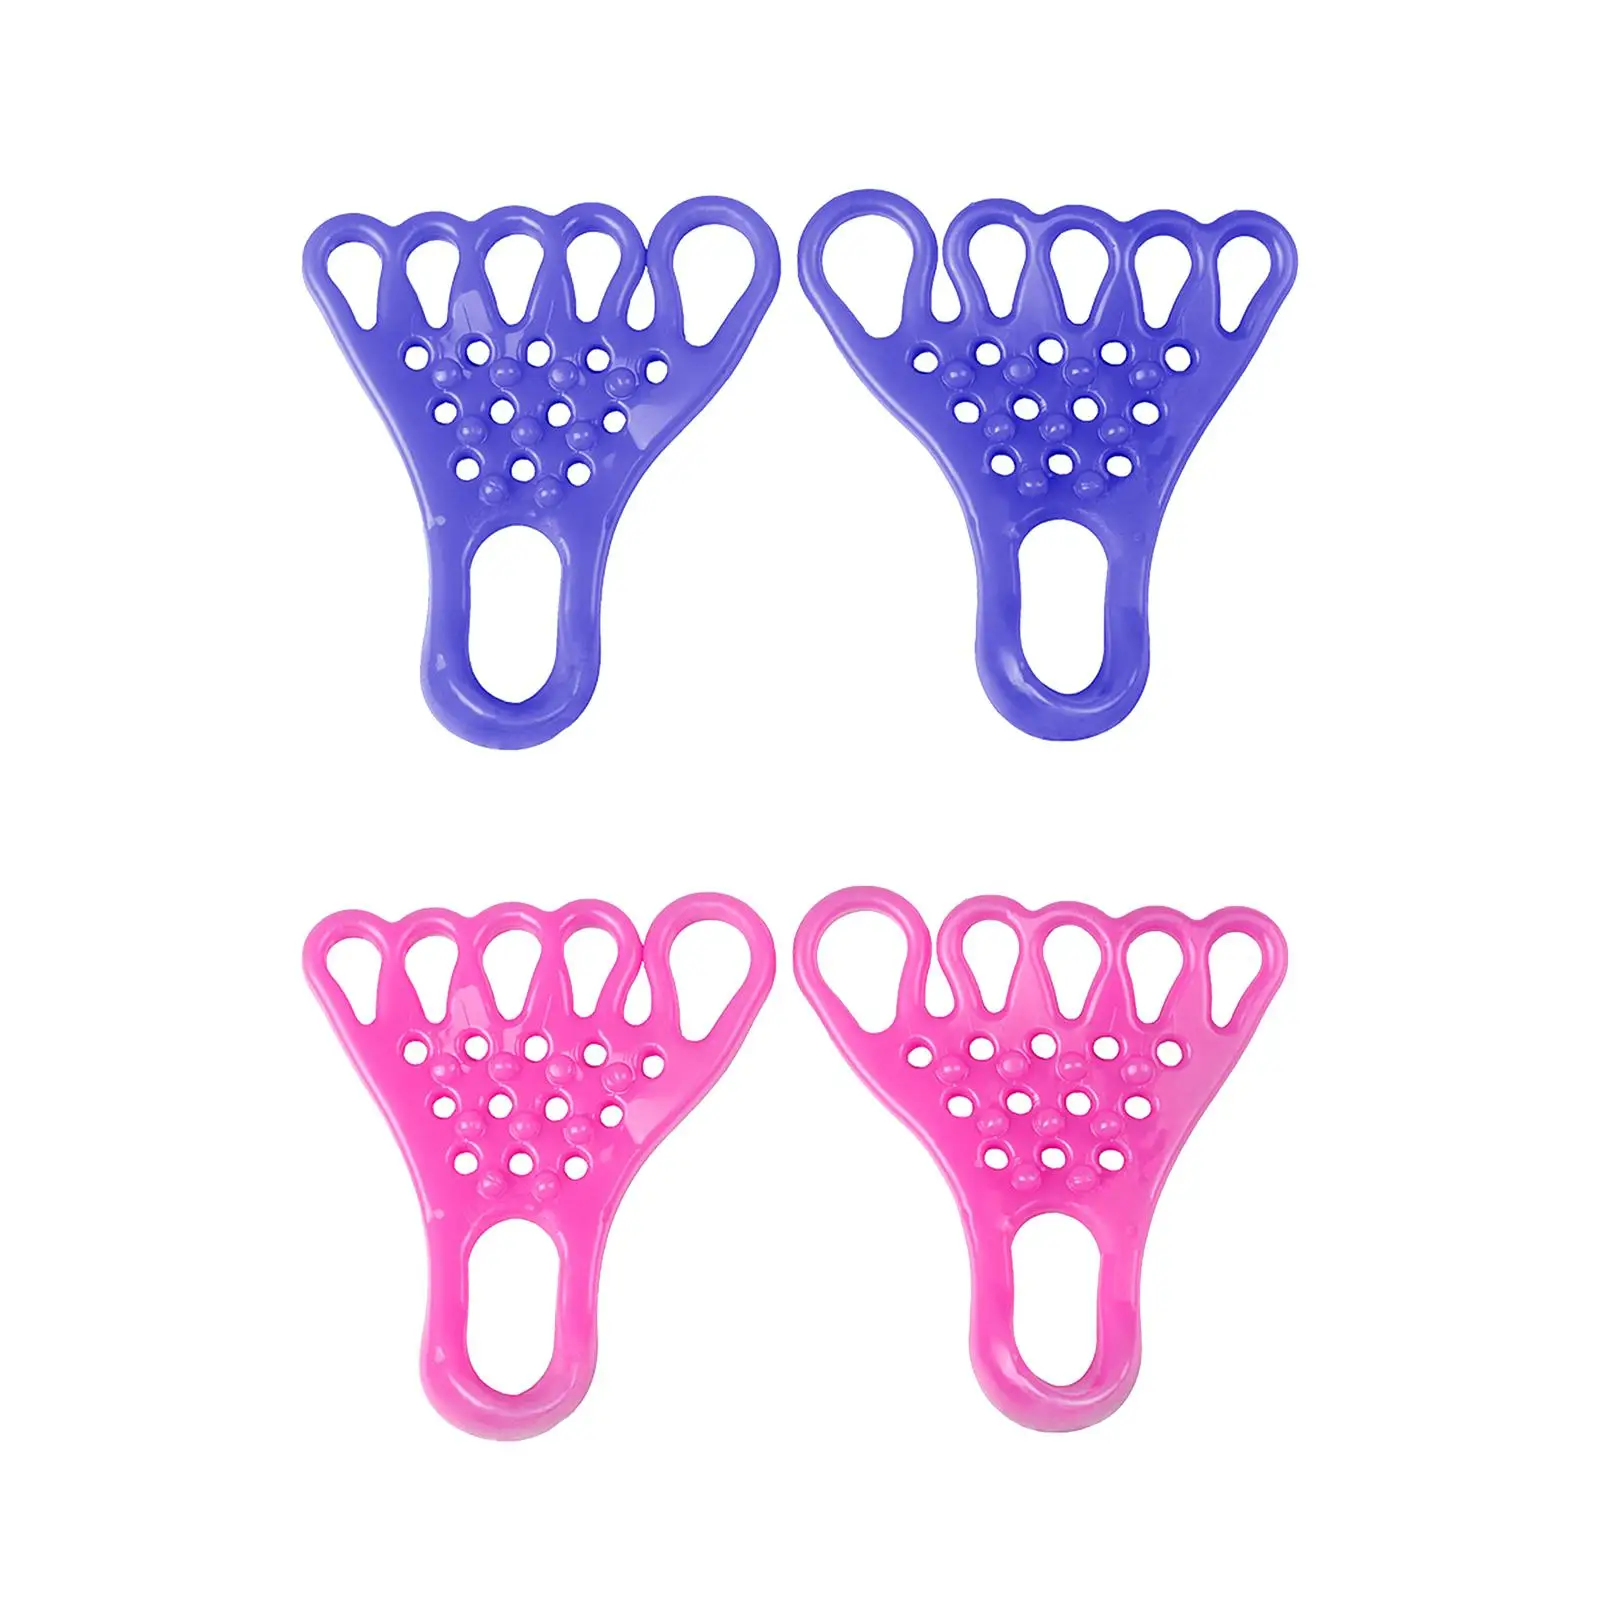 Toe Straightener Toe Protector Nail Tools Hammer Toe Straighteners for Bunions Yoga Hallux Valgus Curled Toes Women Men